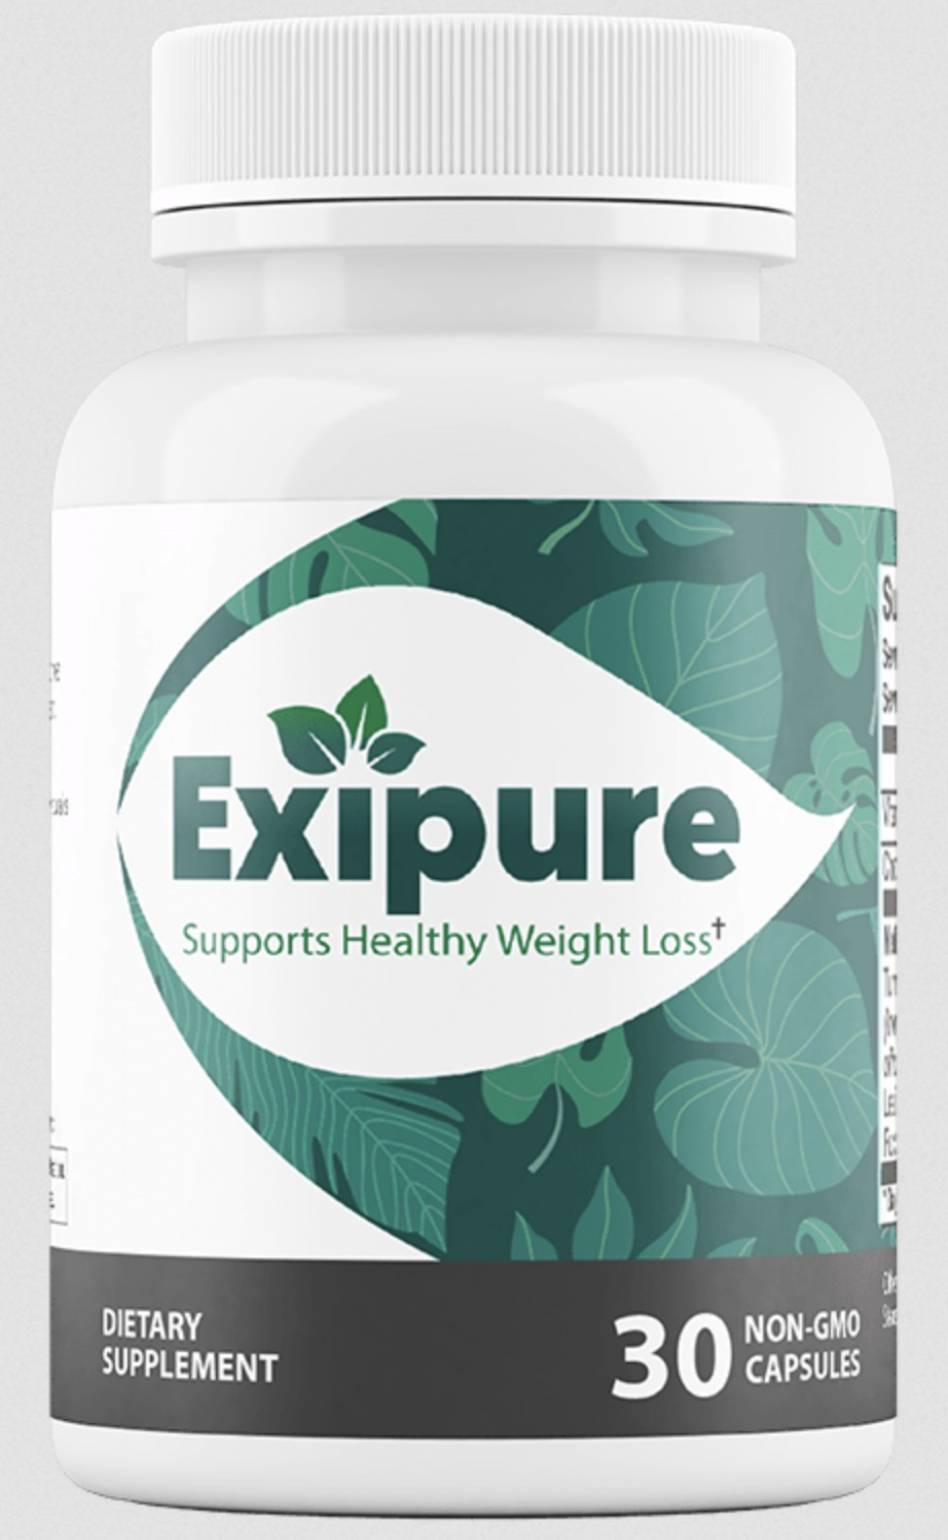 Can I Take Exipure With High Blood Pressure